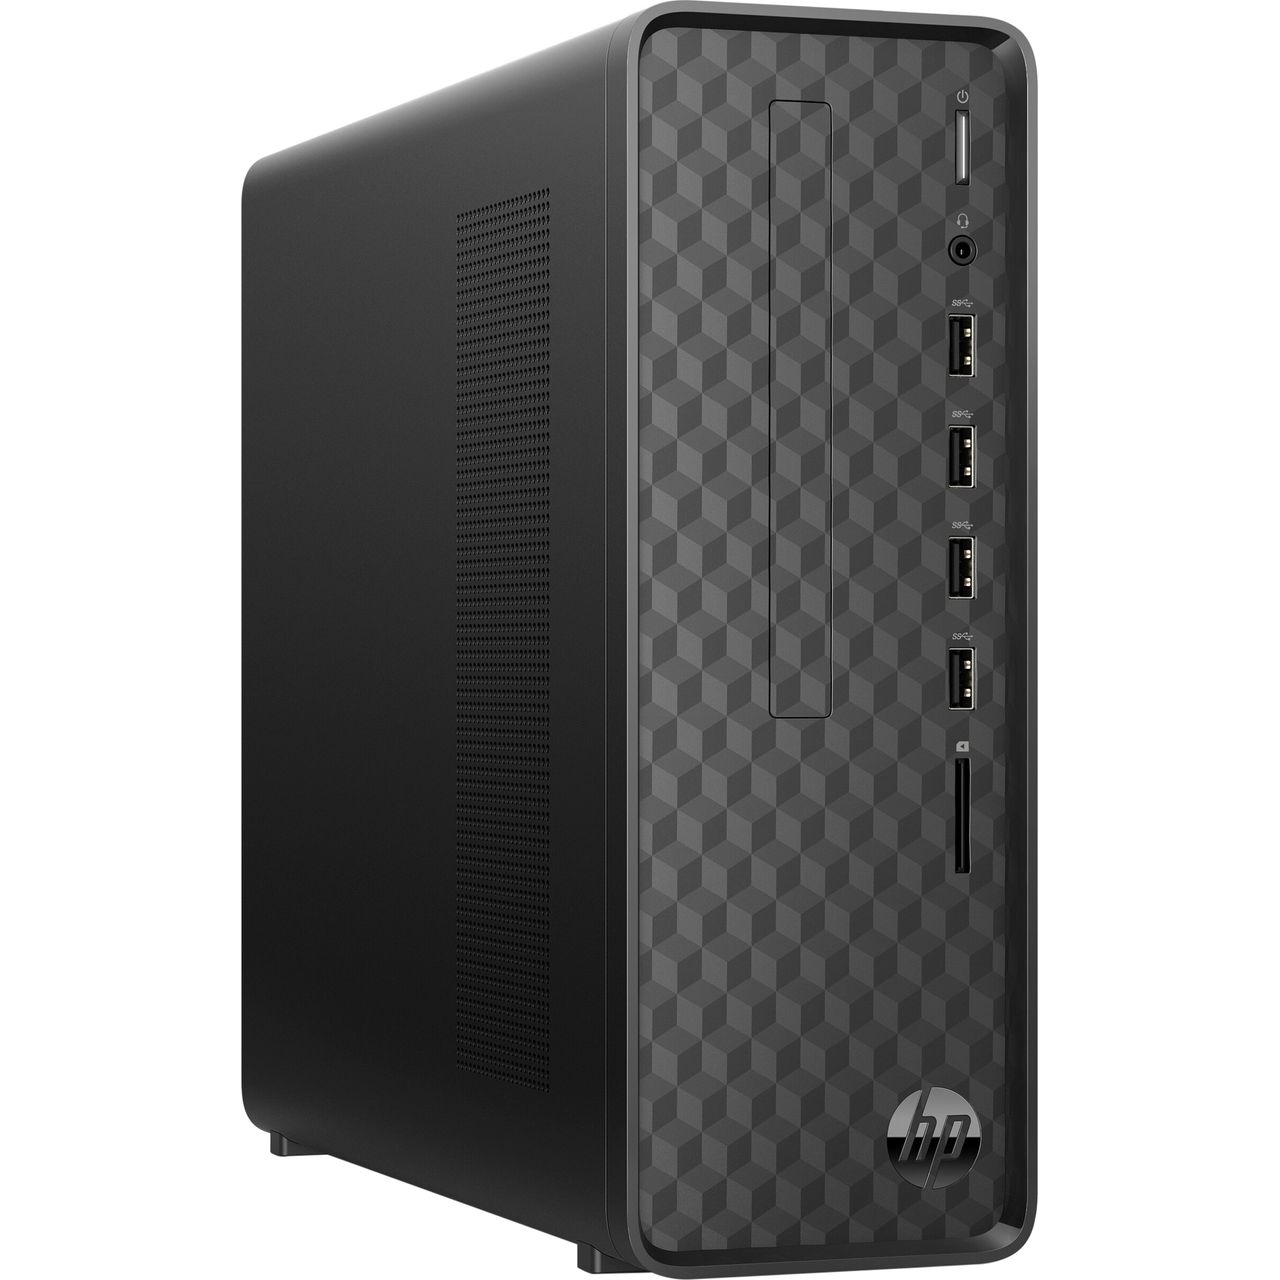 HP S01-aF1004na Tower Review